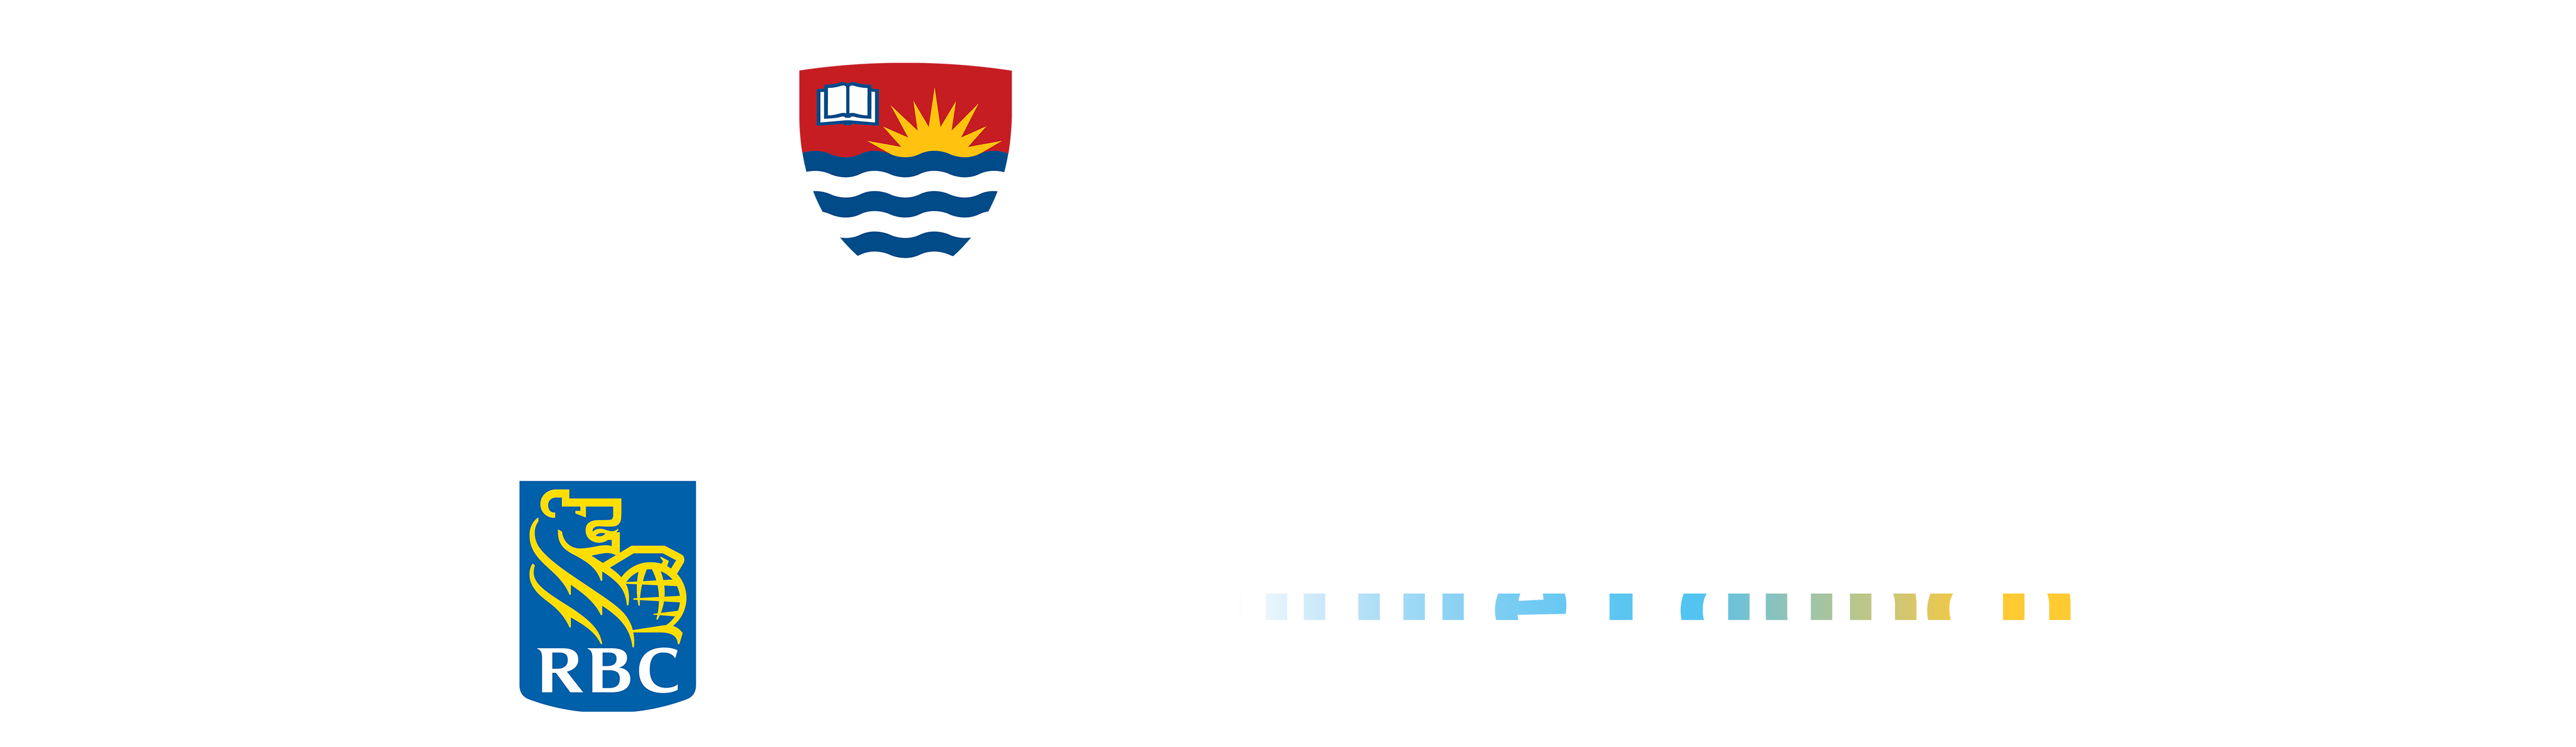 Work Integrated Learning at Lakehead University